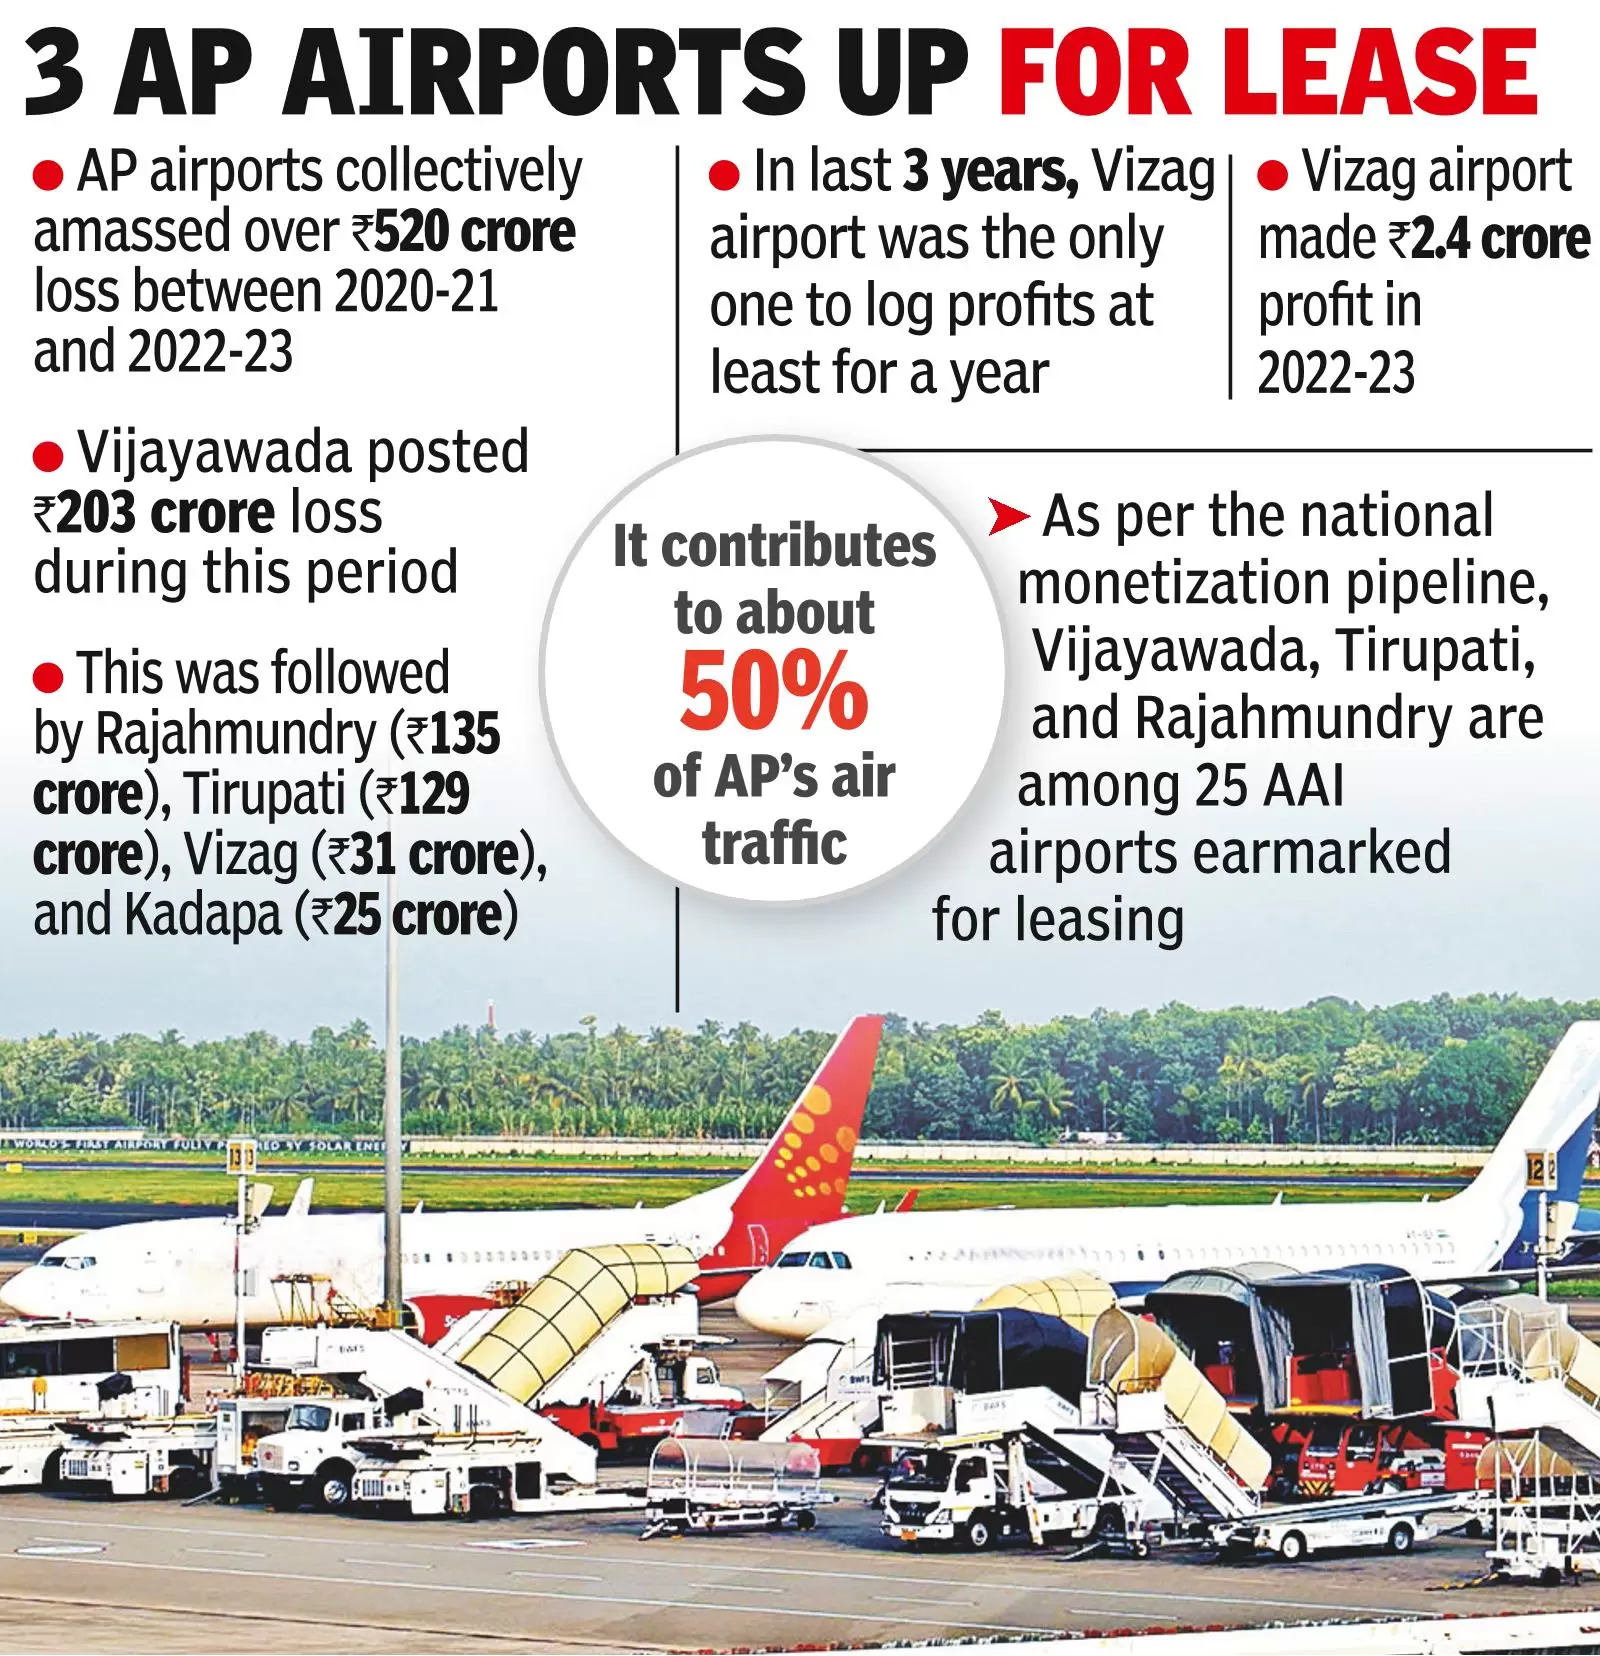 Vizag airport posts 10% growth in passenger traffic